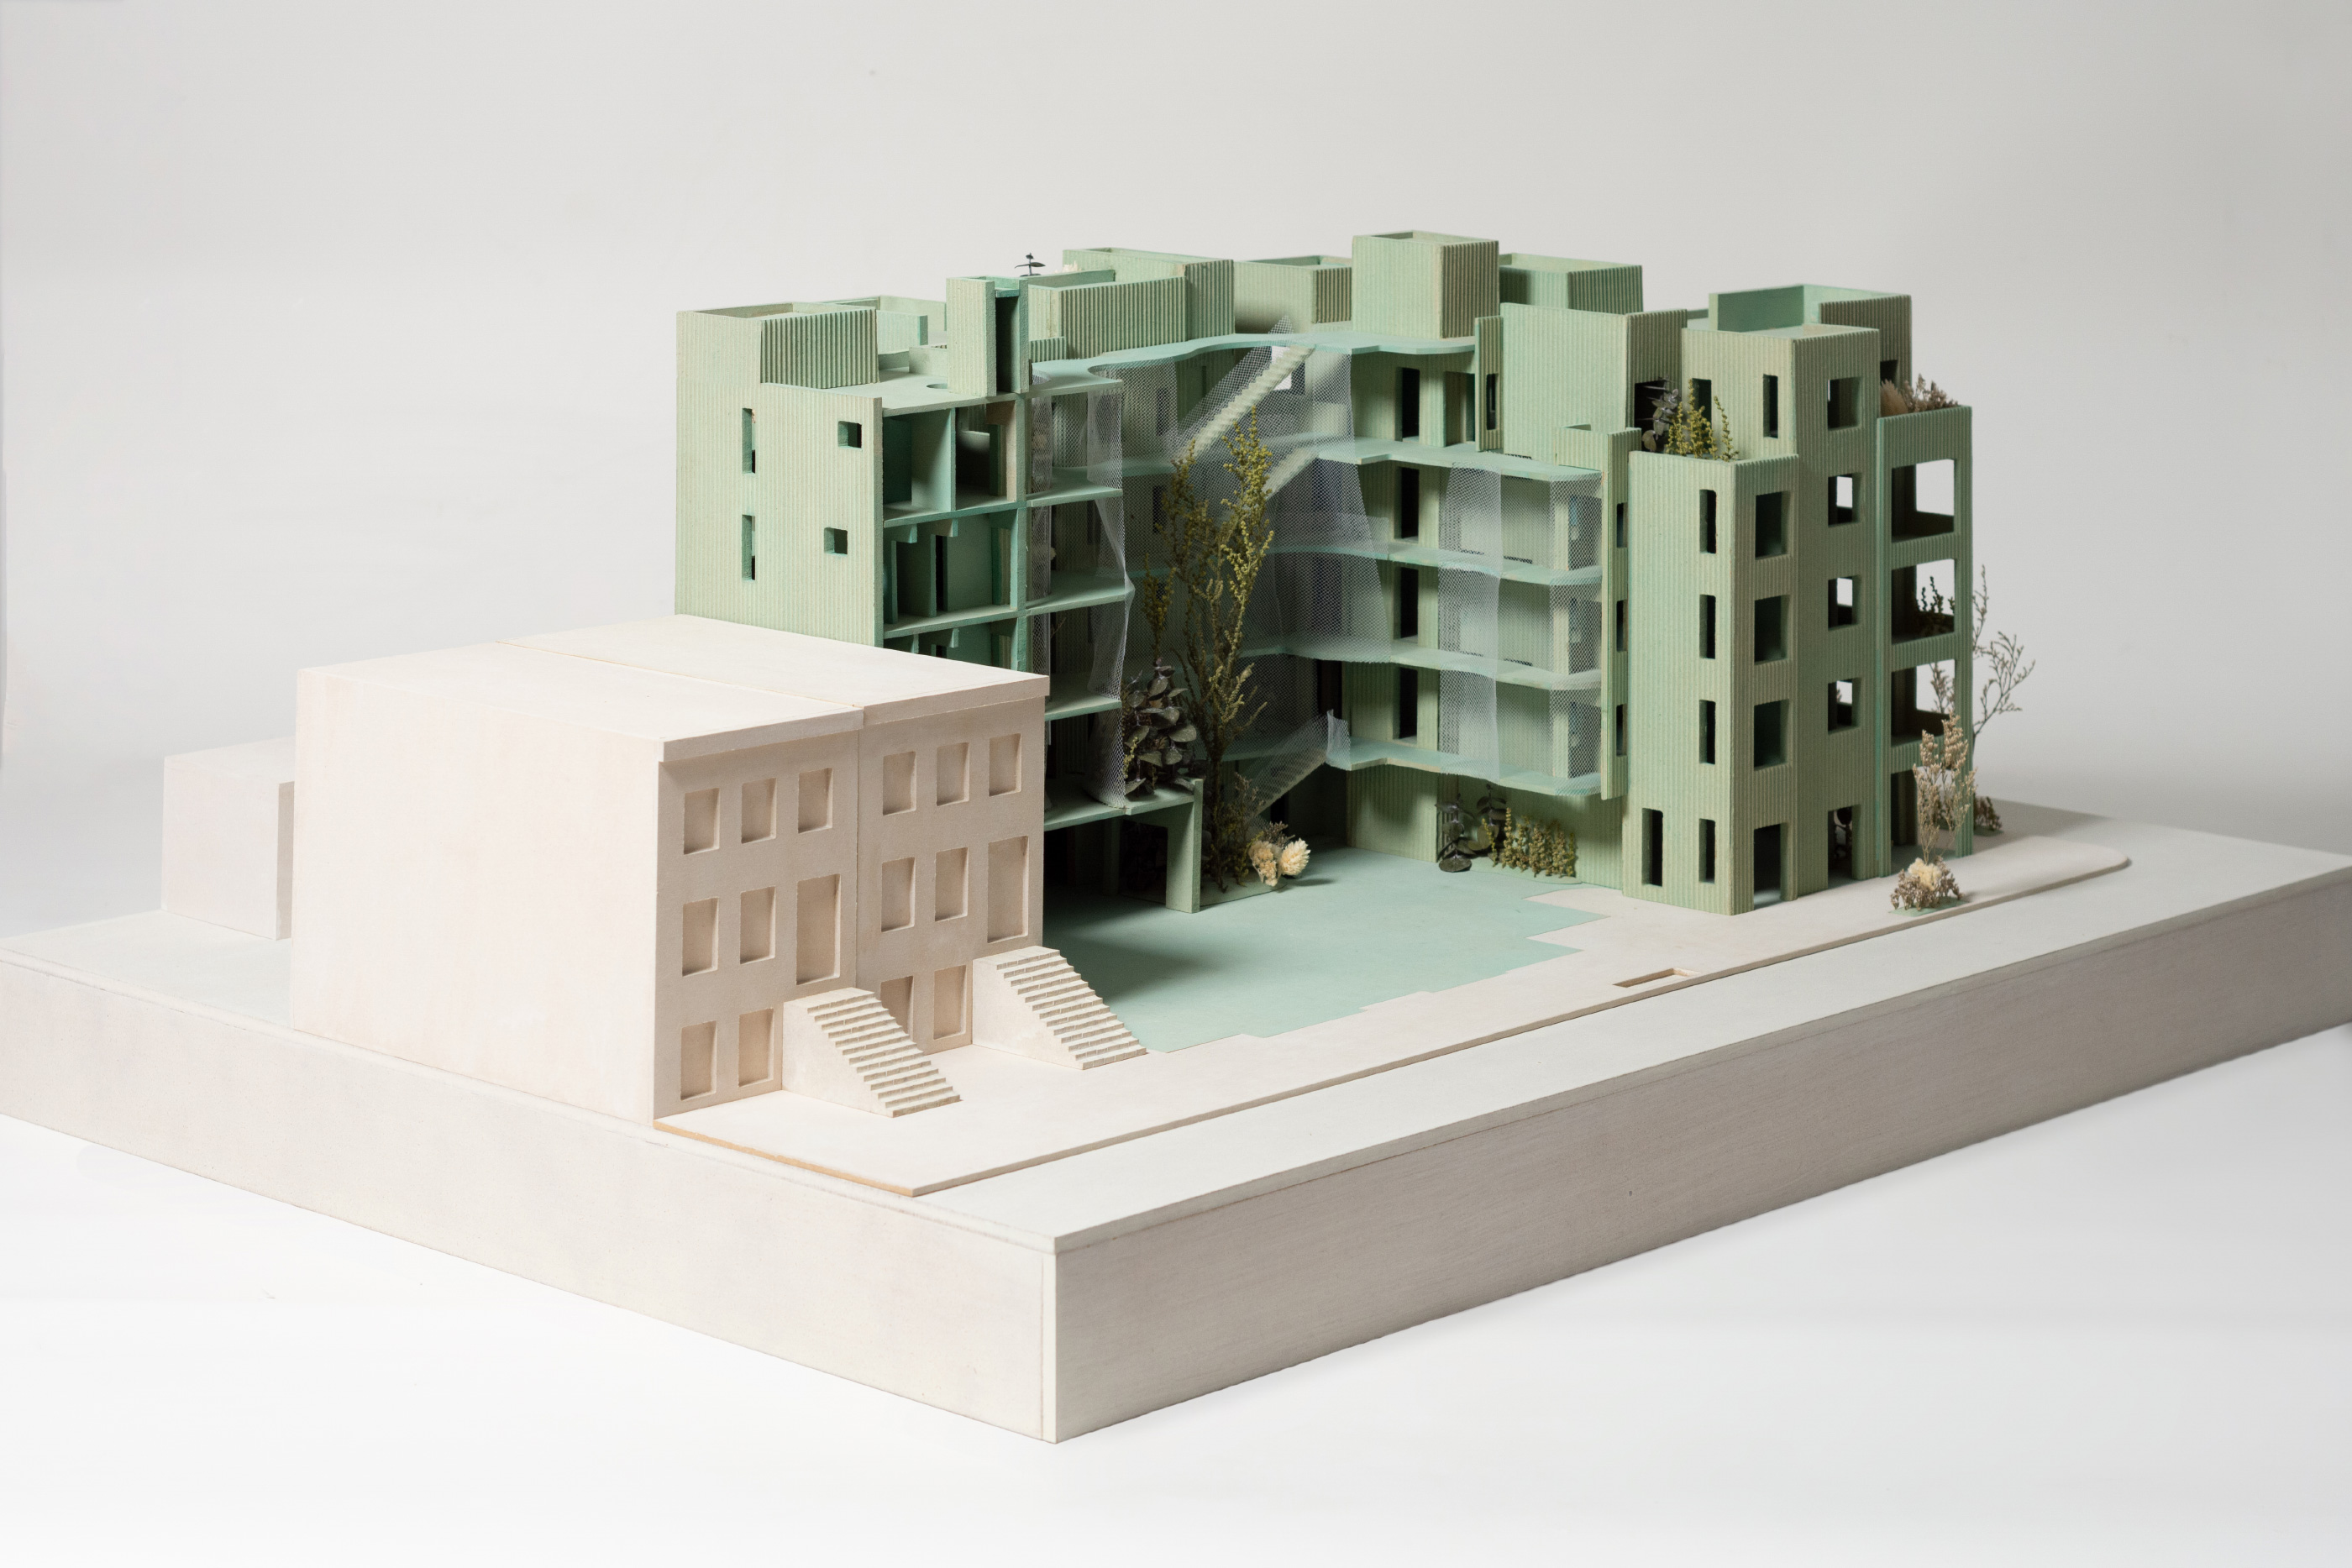 Model of an apartment building with large exposed courtyard